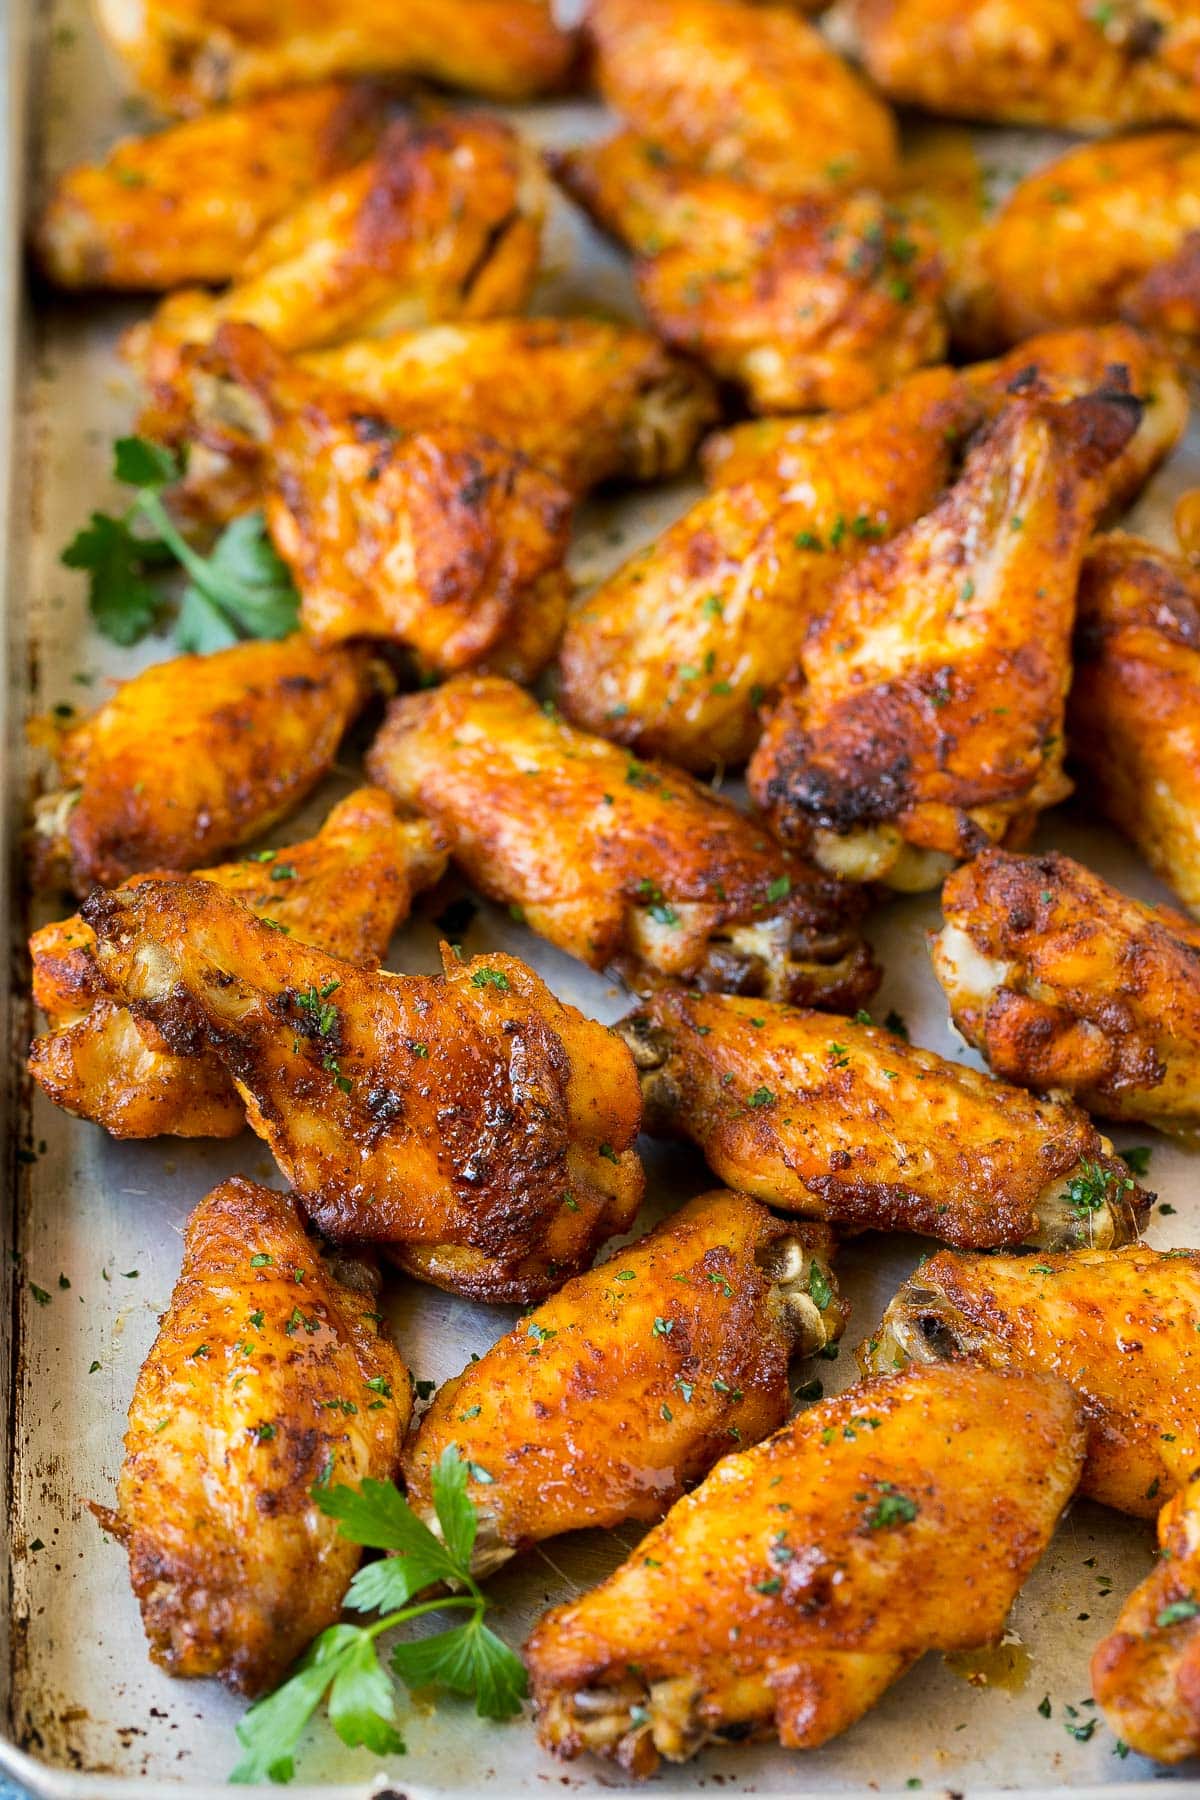 A tray of baked chicken wings garnished with parsley.